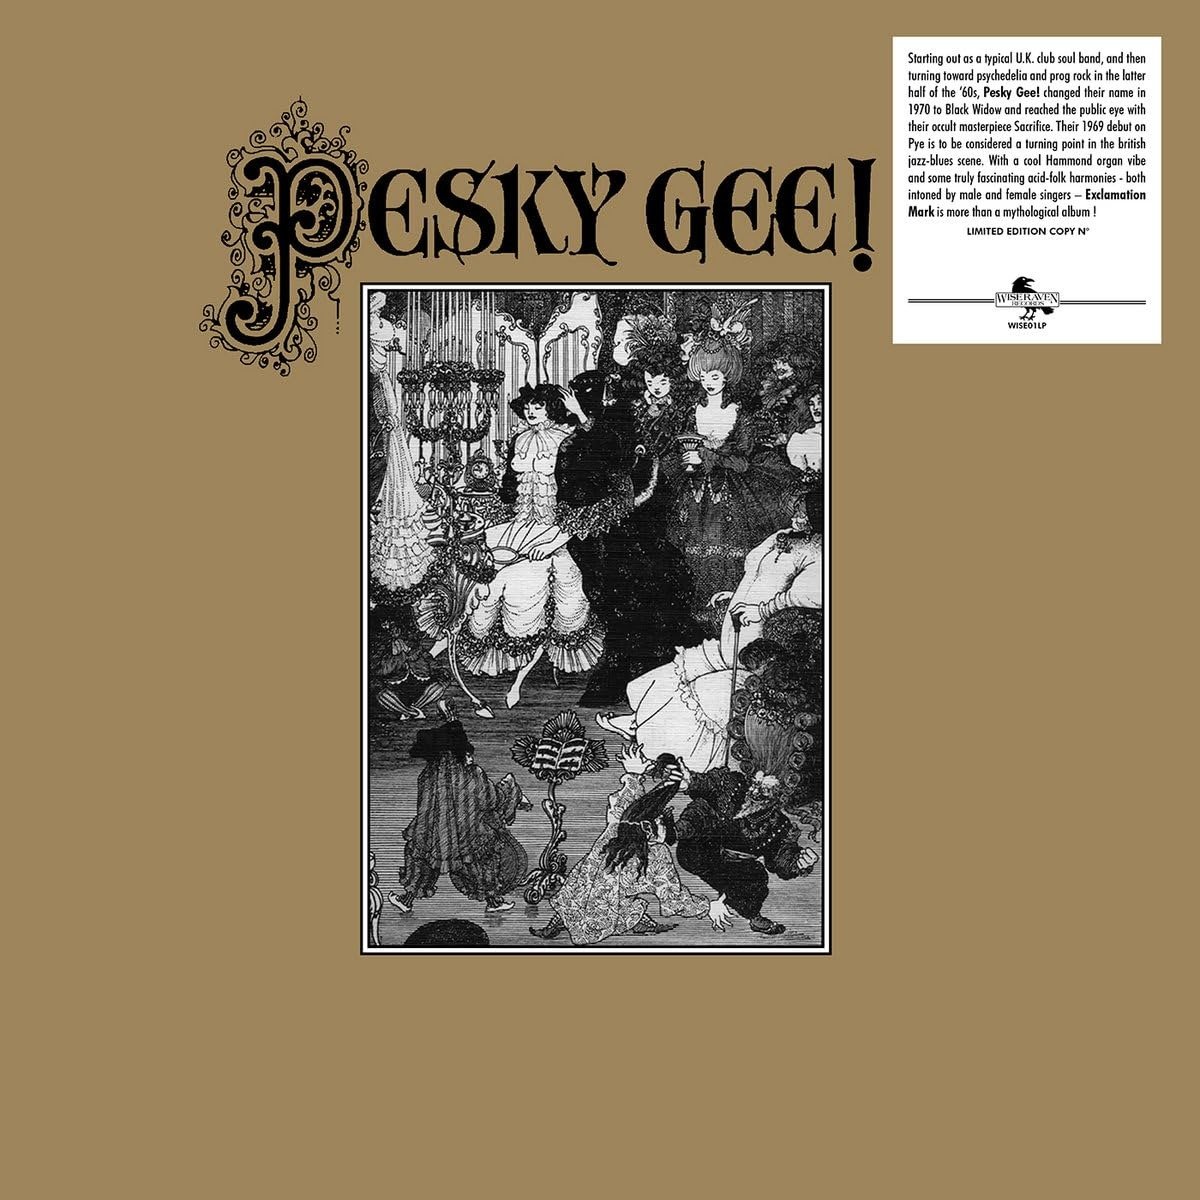 CD Shop - PESKY GEE! EXCLAMATION MARK